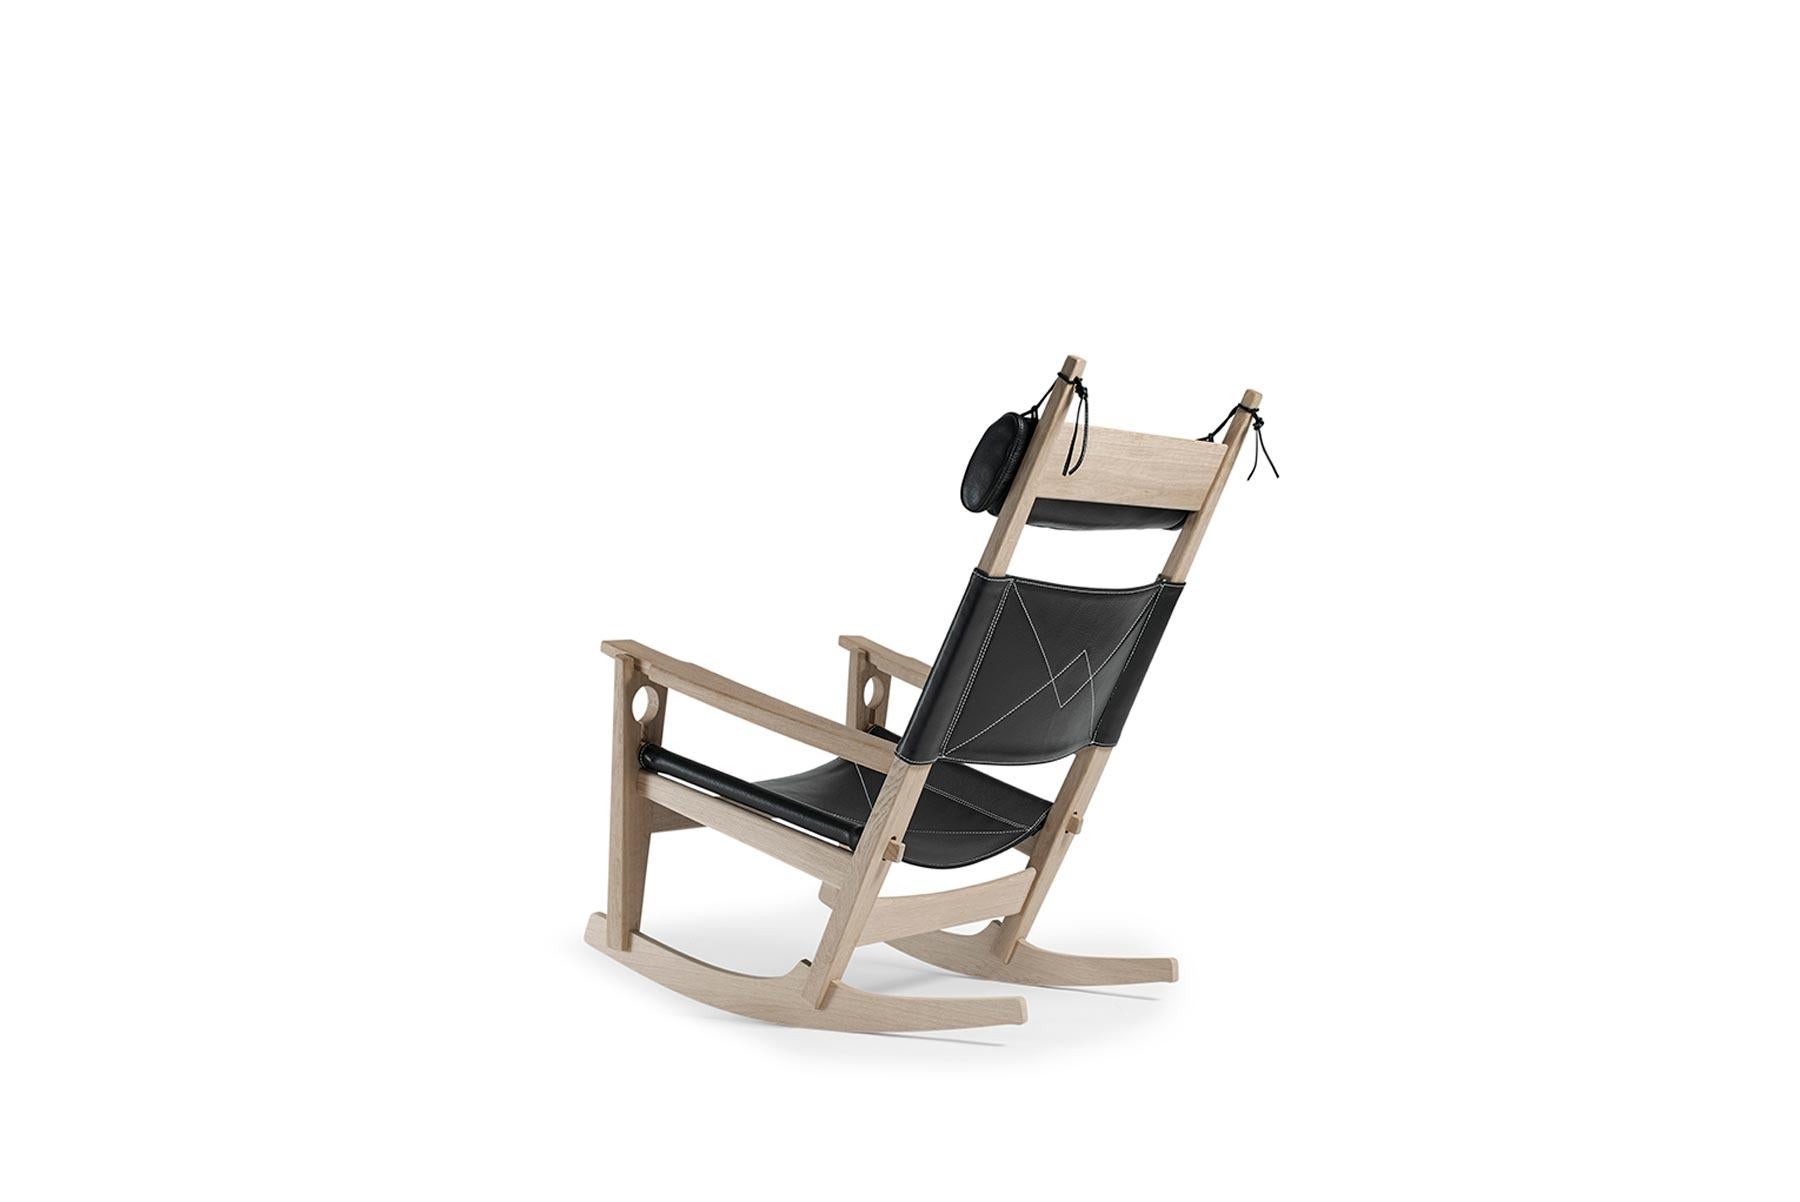 Designed in 1967 by Hans Wegner, the 673 “Keyhole” rocking chair showcases the chair’s construction as well as the designer’s creativity toward form and function. The chair is hand built at GETAMA’s factory in Gedsted, Denmark by skilled